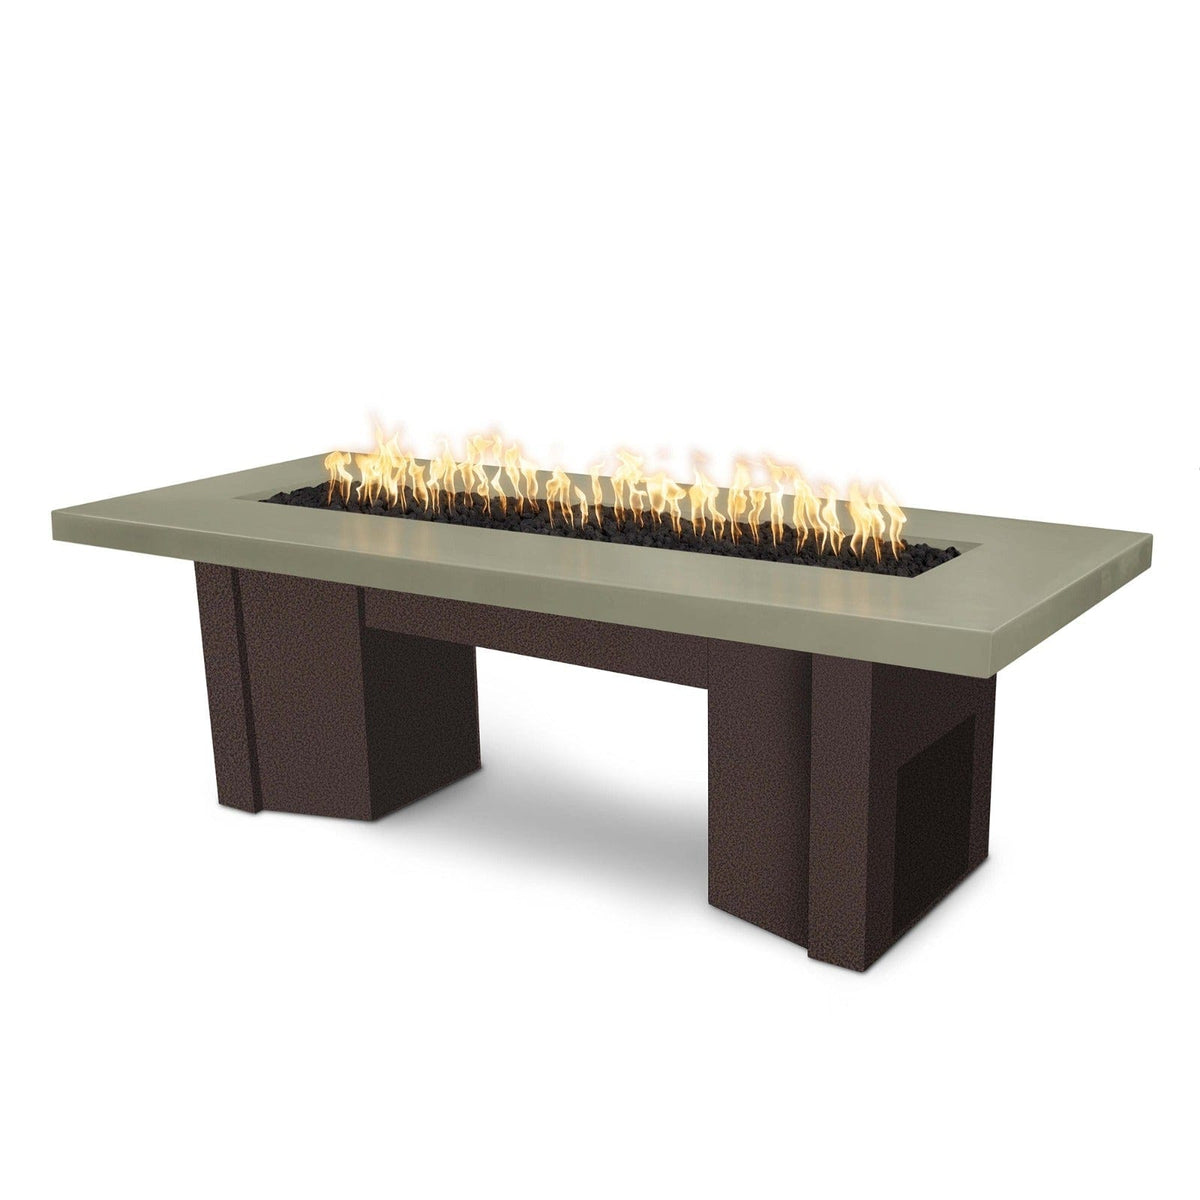 The Outdoor Plus Fire Features Ash (-ASH) / Copper Vein Powder Coated Steel (-CPV) The Outdoor Plus 78&quot; Alameda Fire Table Smooth Concrete in Liquid Propane - Flame Sense System with Push Button Spark Igniter / OPT-ALMGFRC78FSEN-LP